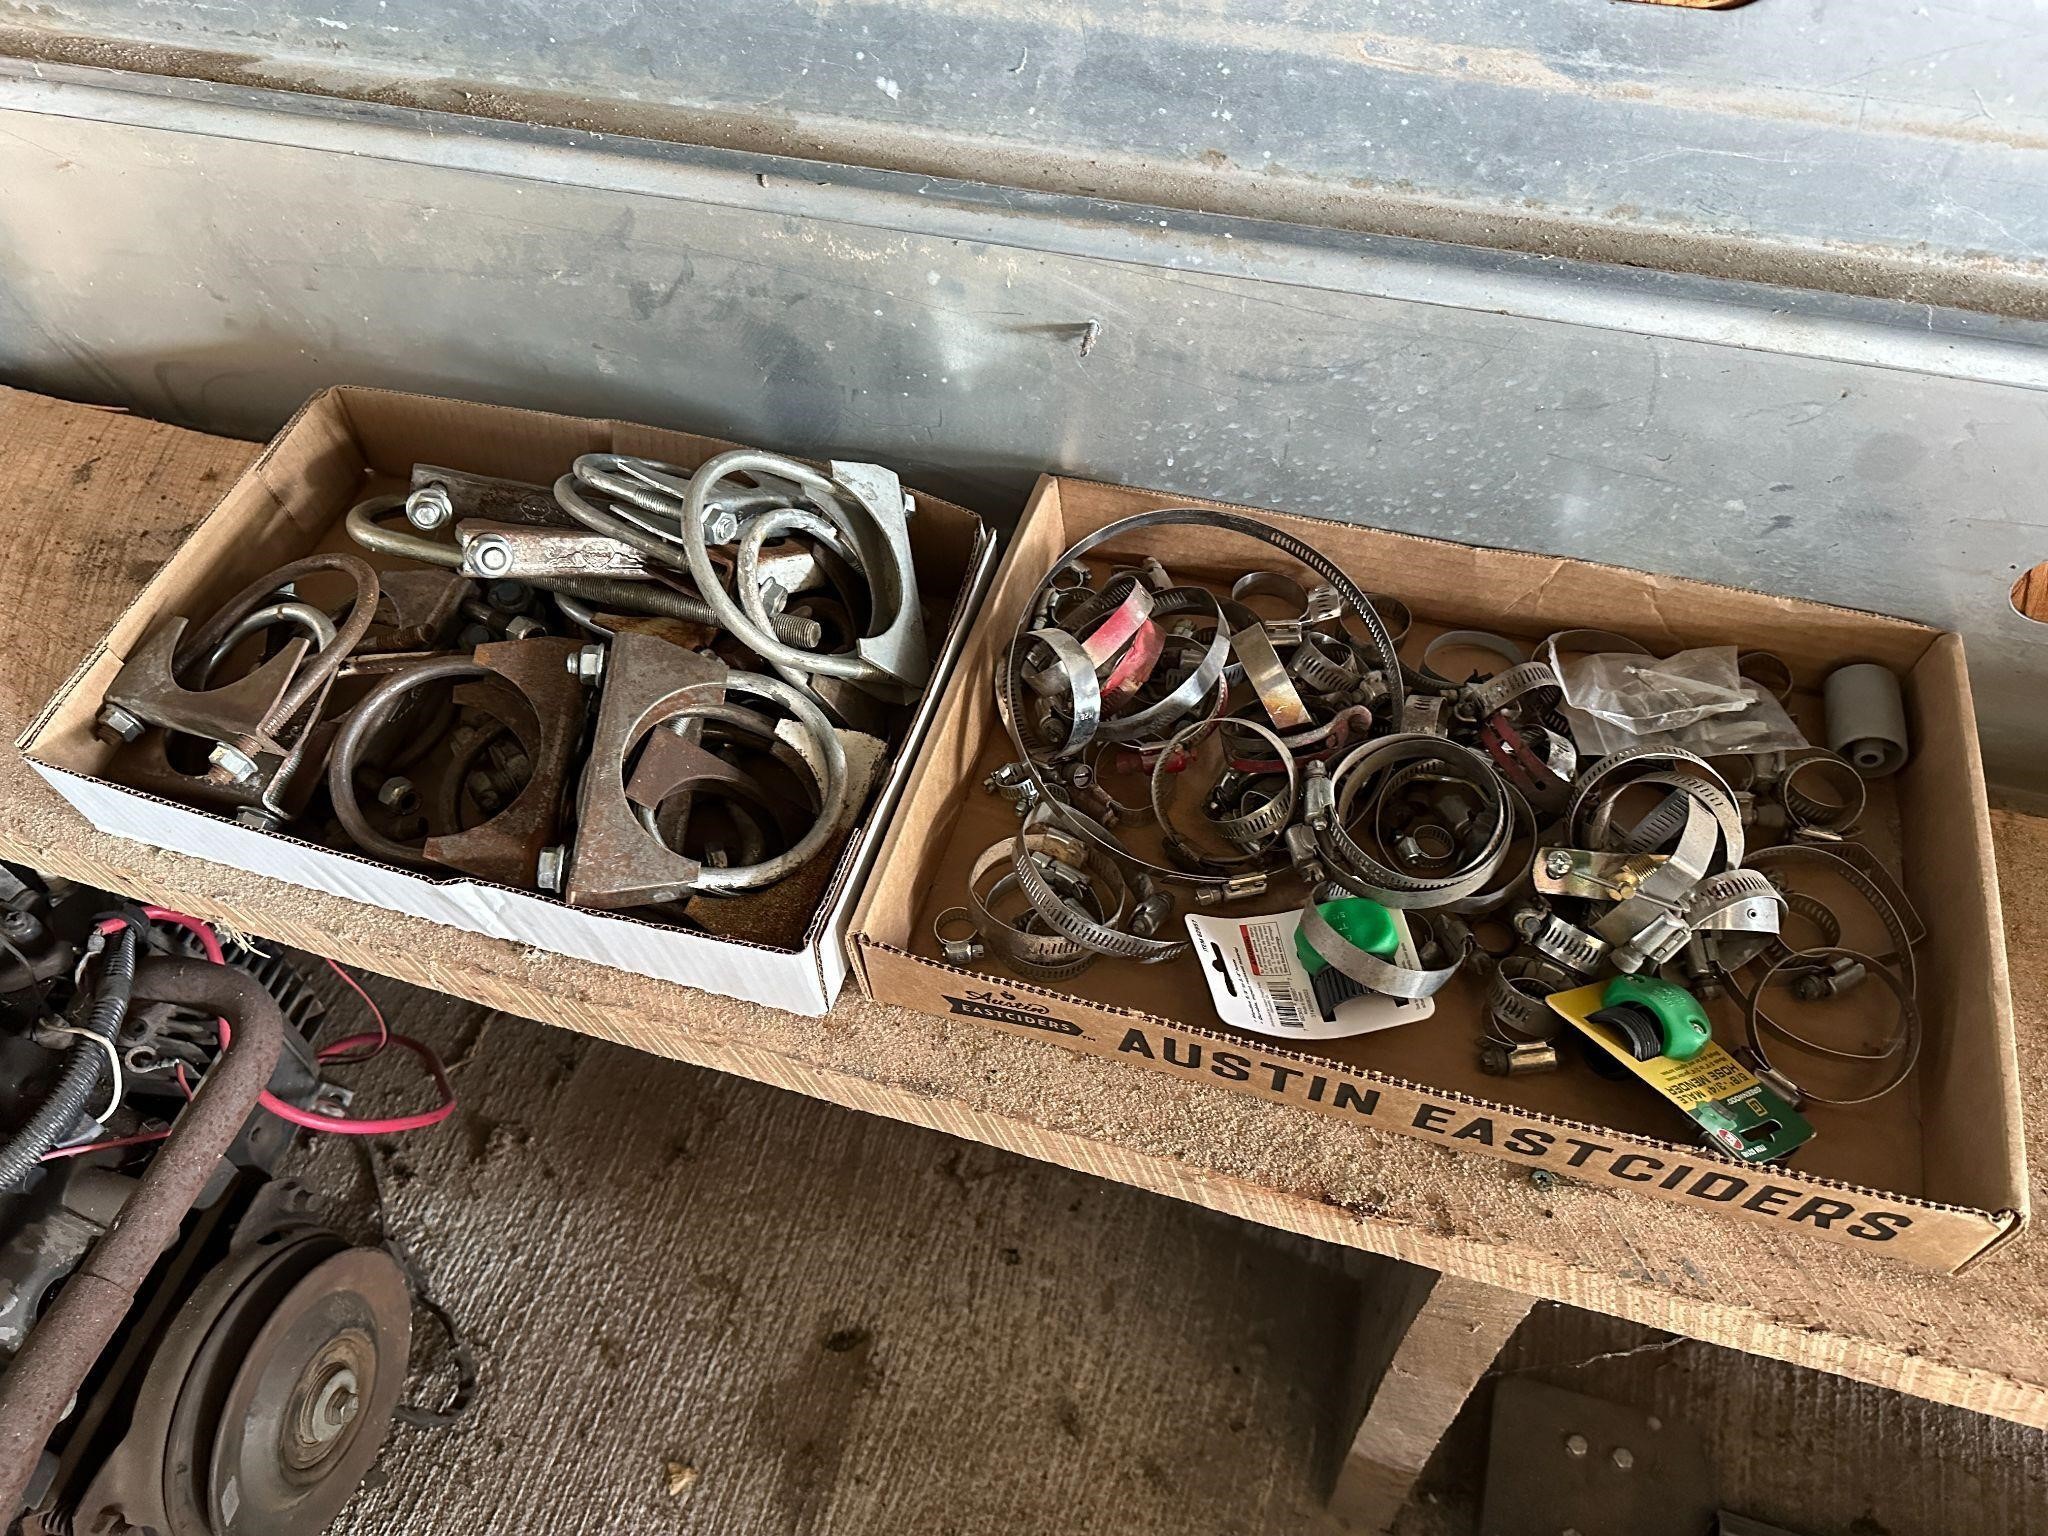 Lot Of Hose Clamps & Muffler Clamps